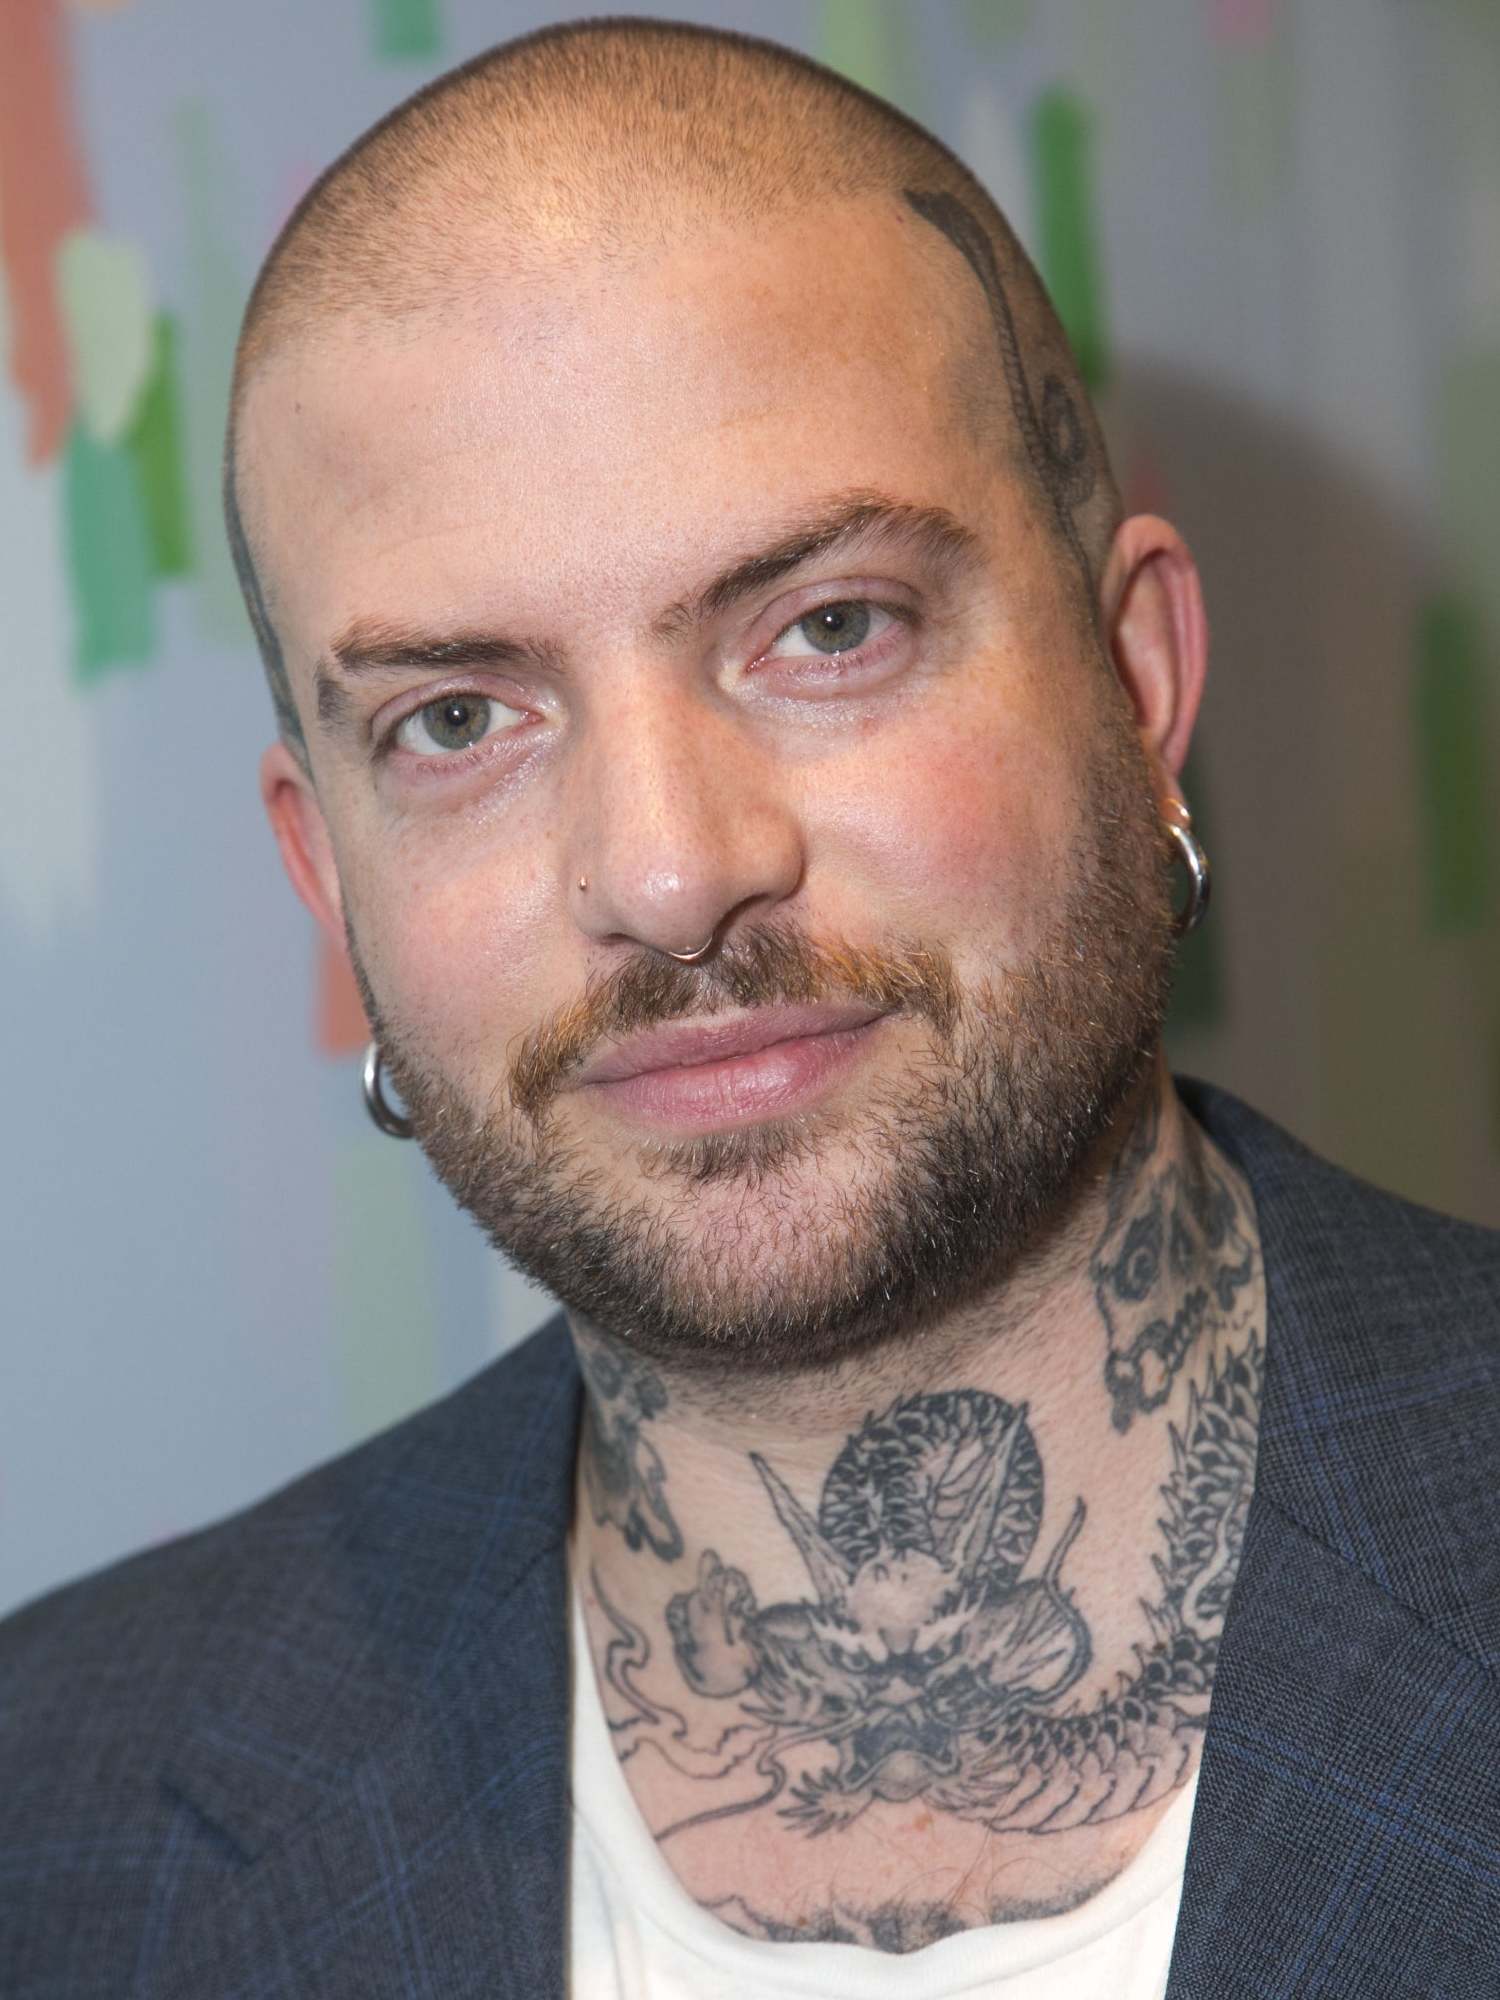 Lloyd’s tattoos give the director his distinctive look